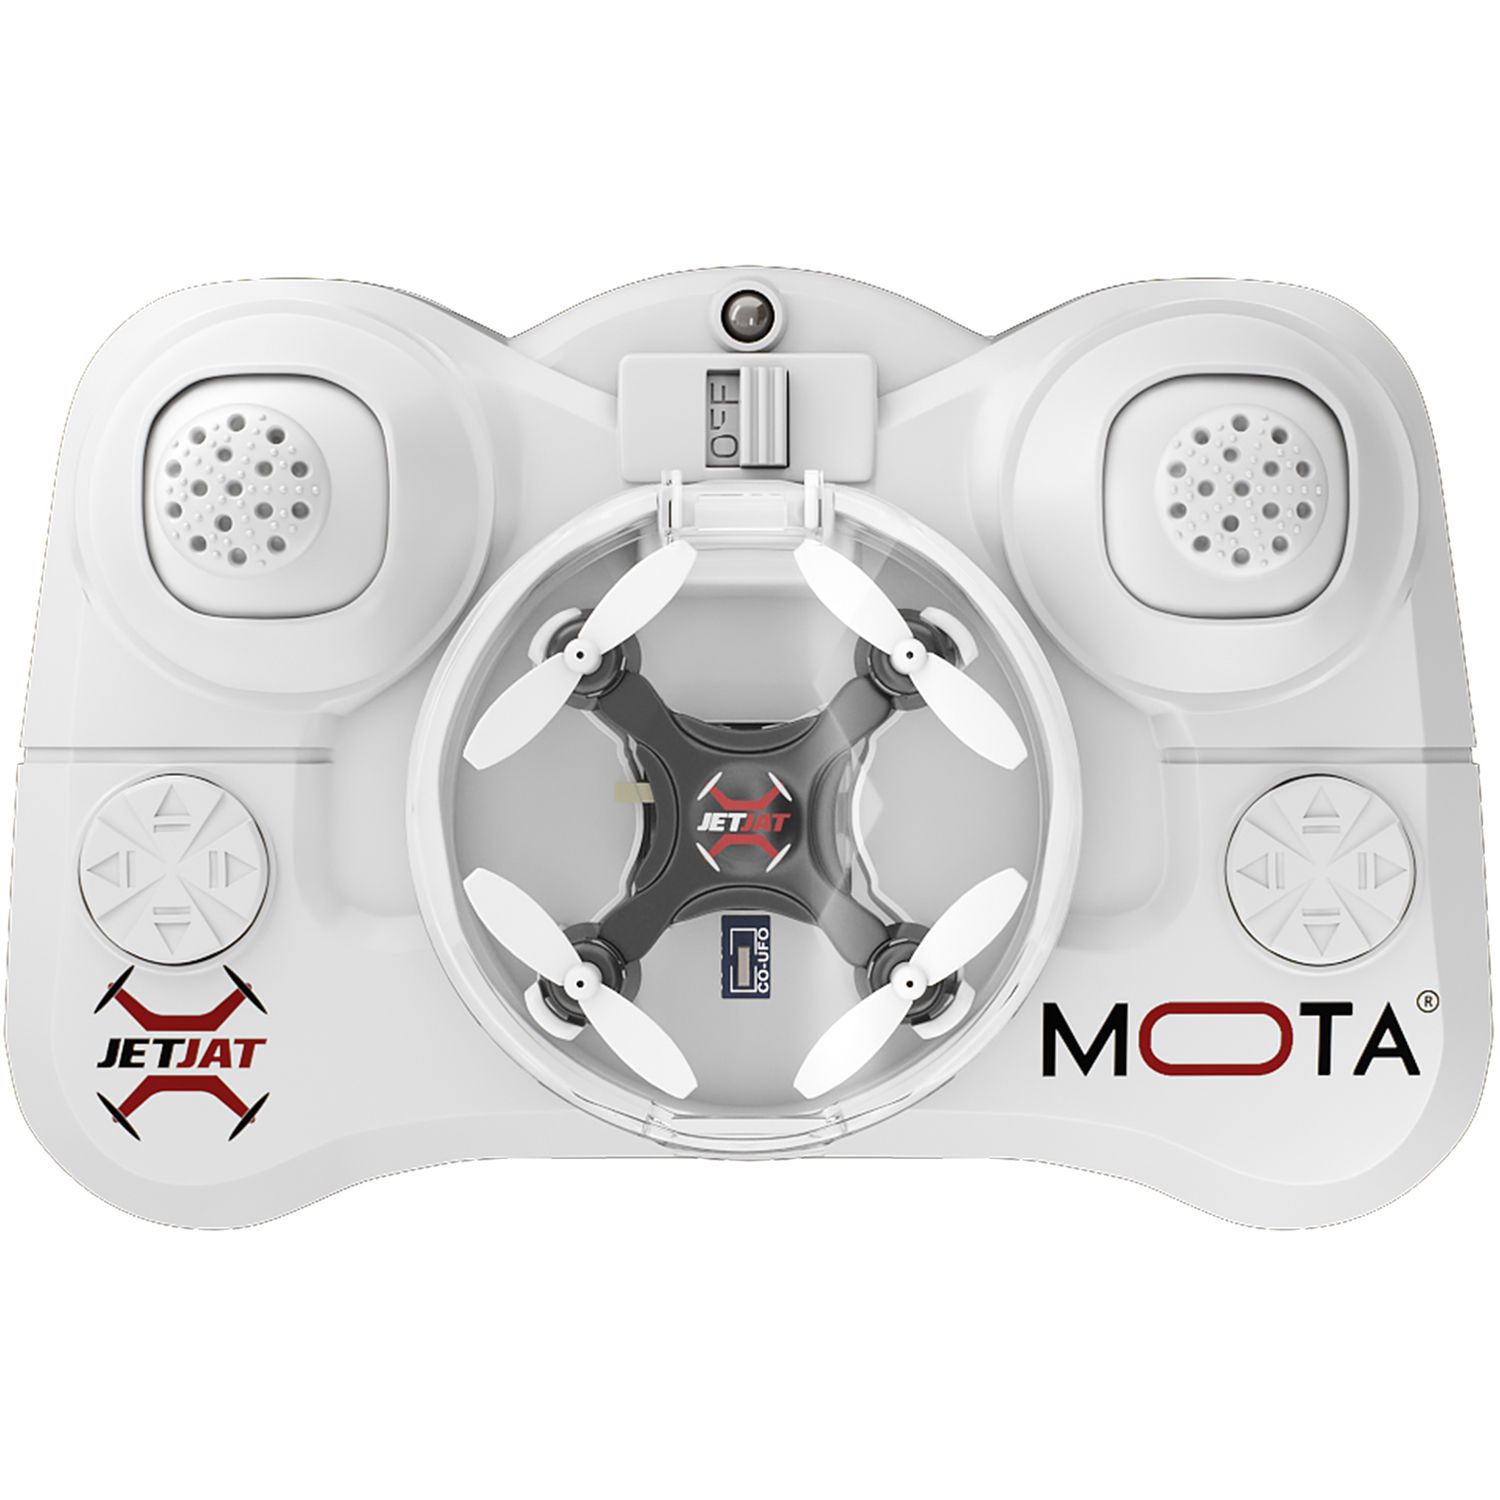 Red MOTA JETJAT Nano Camera Video Drone with 4-Channel Controller